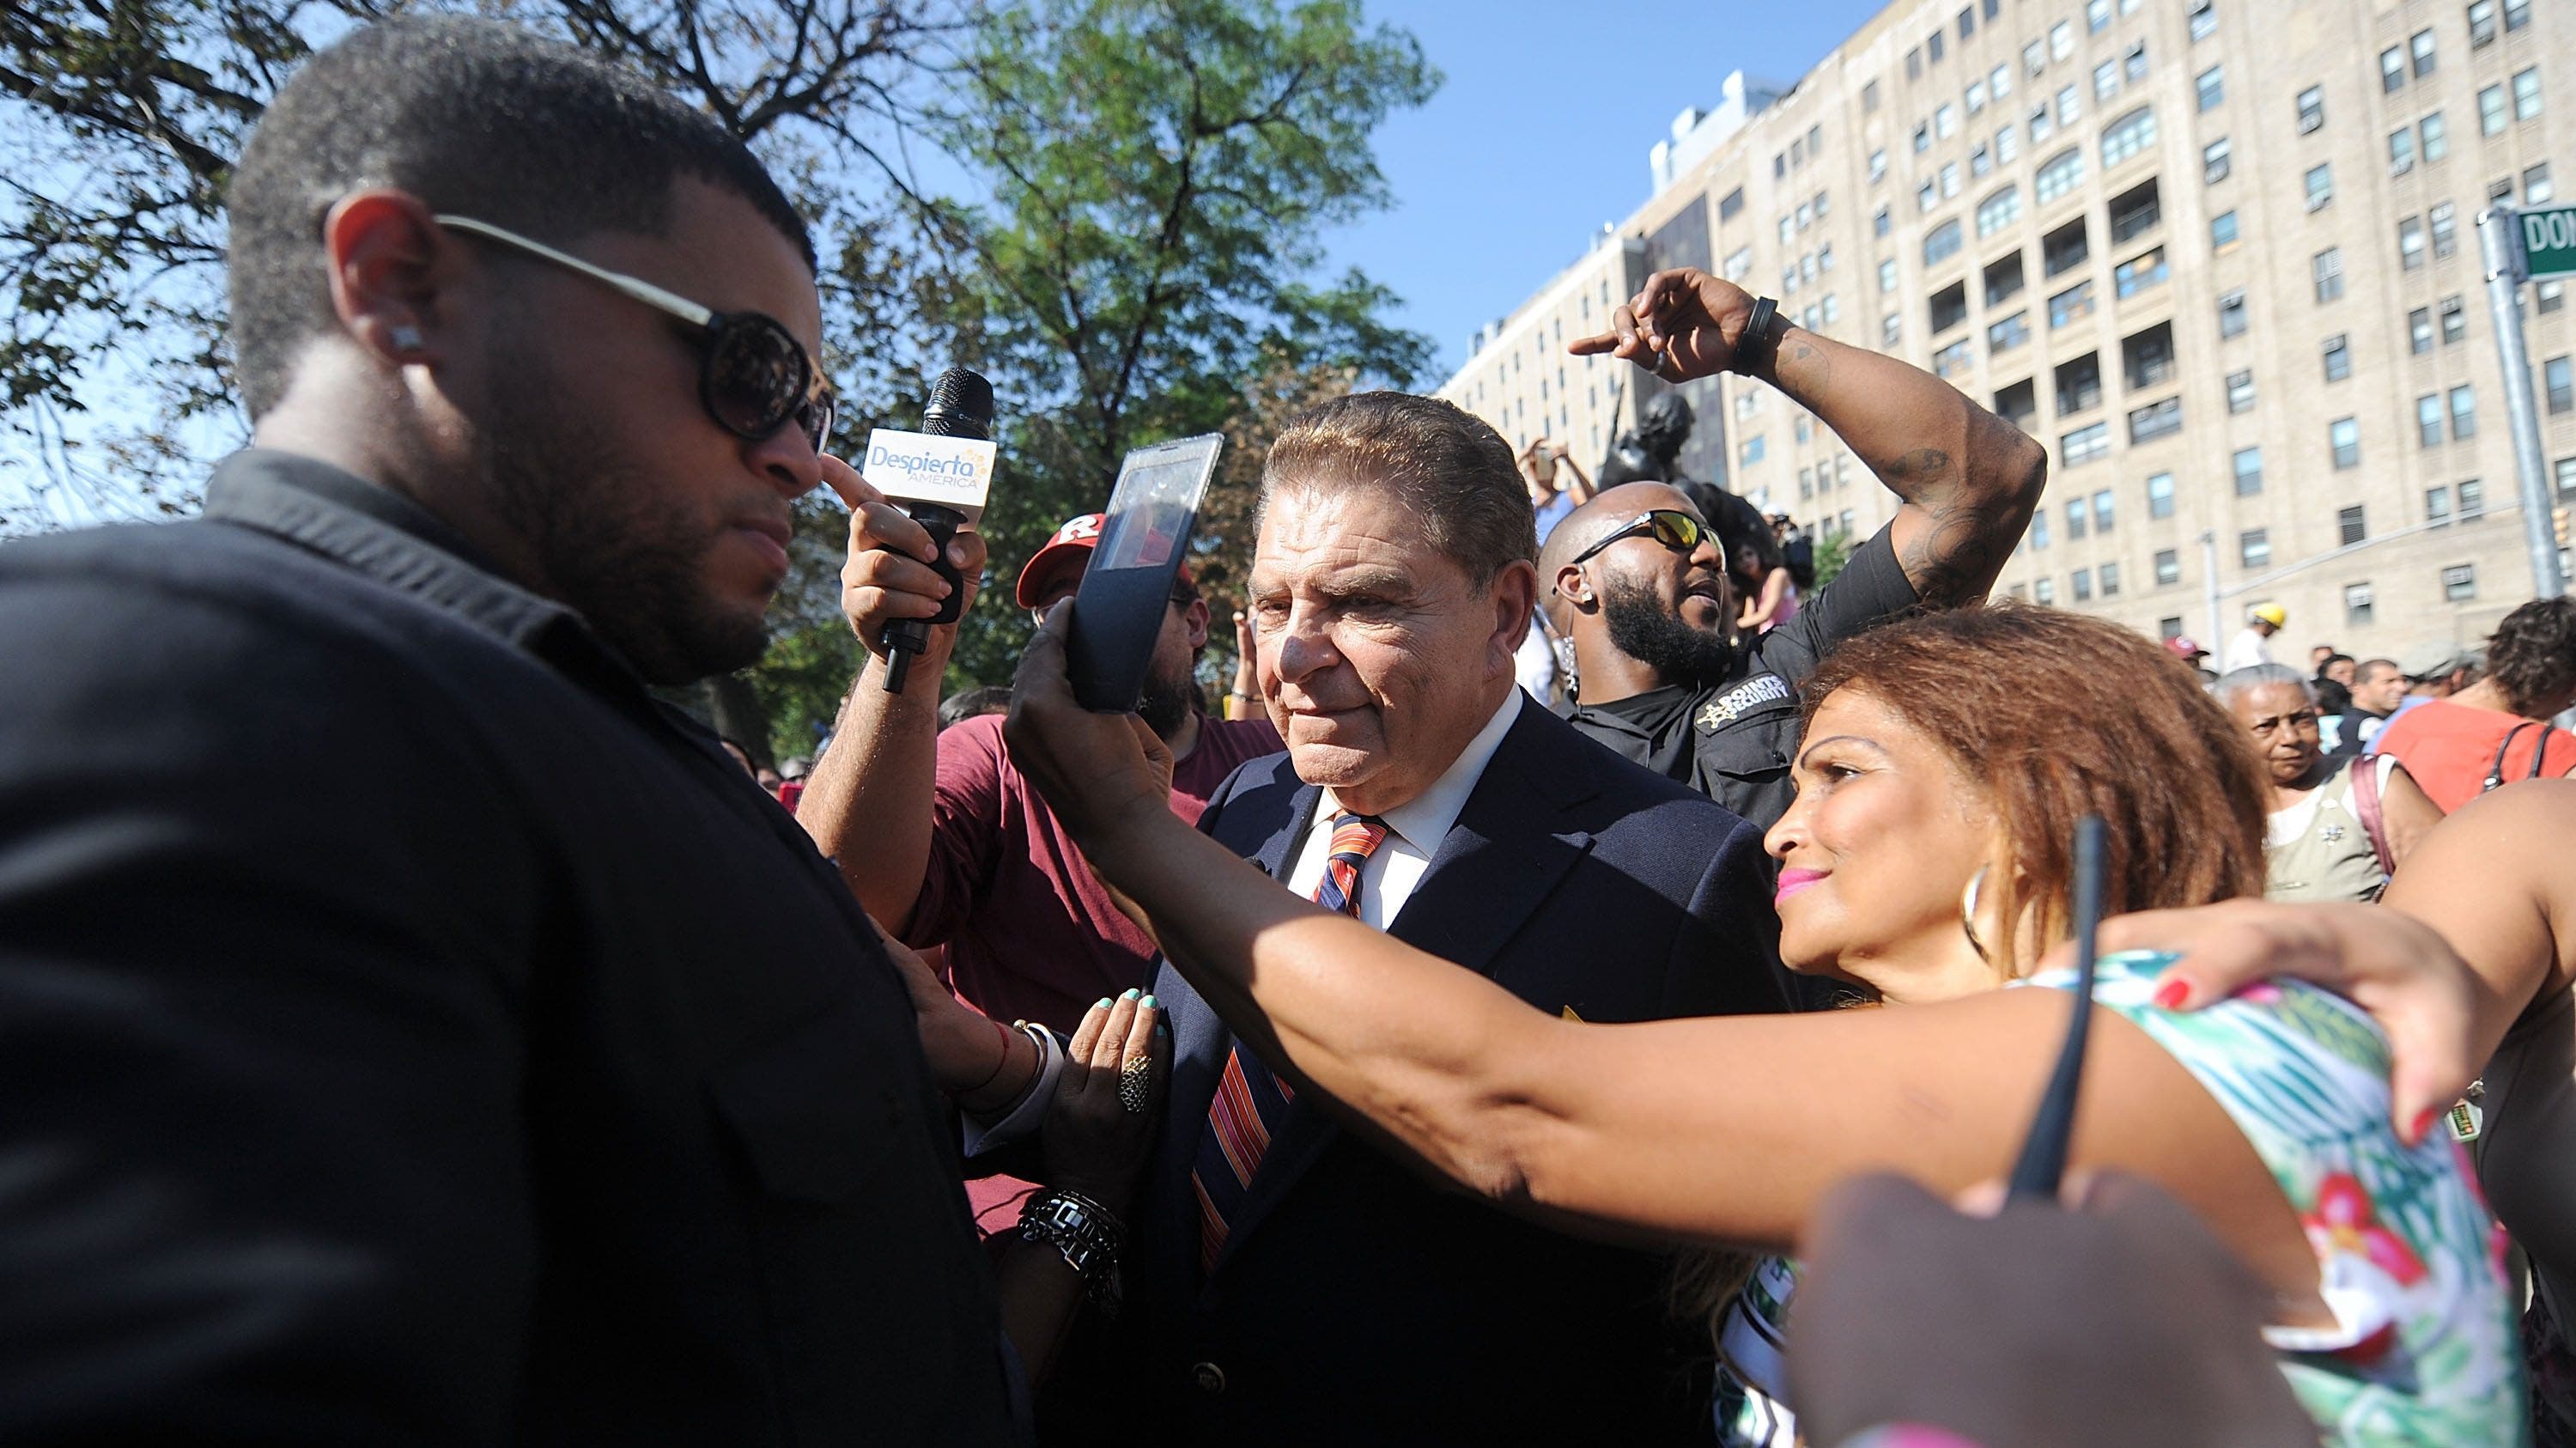 Don Francisco gets street named after him in New York City